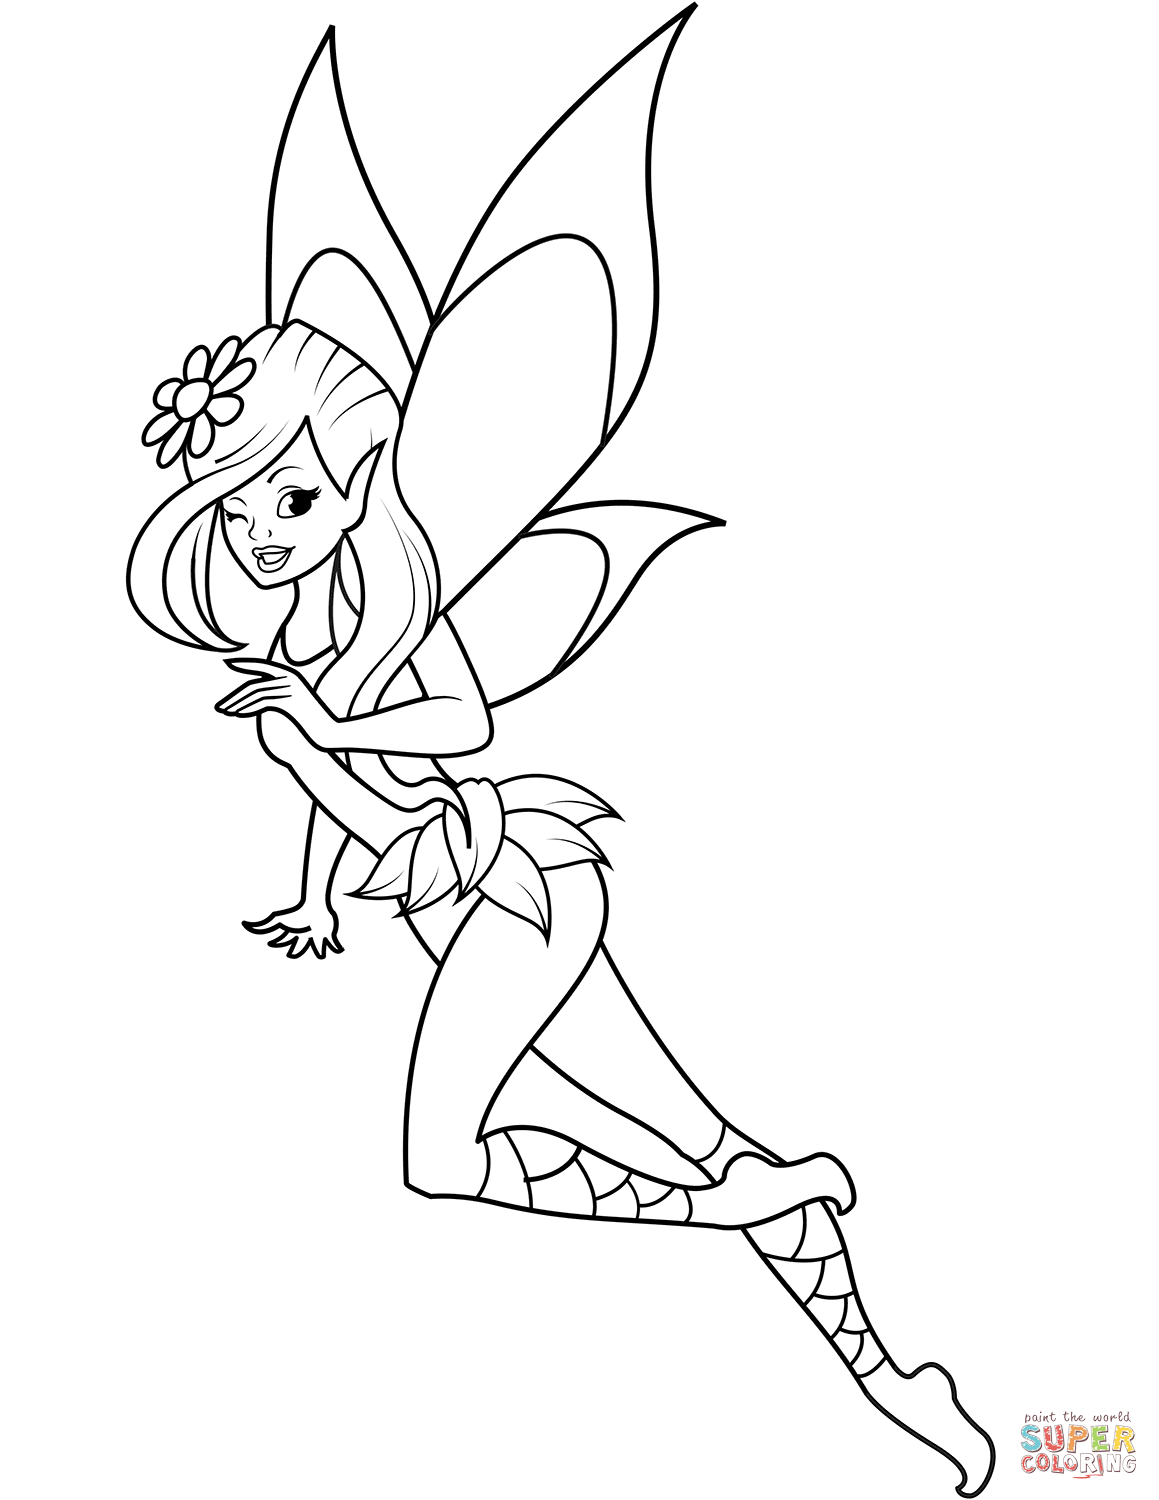 Disney Fairies Coloring Pages at GetColorings.com | Free printable